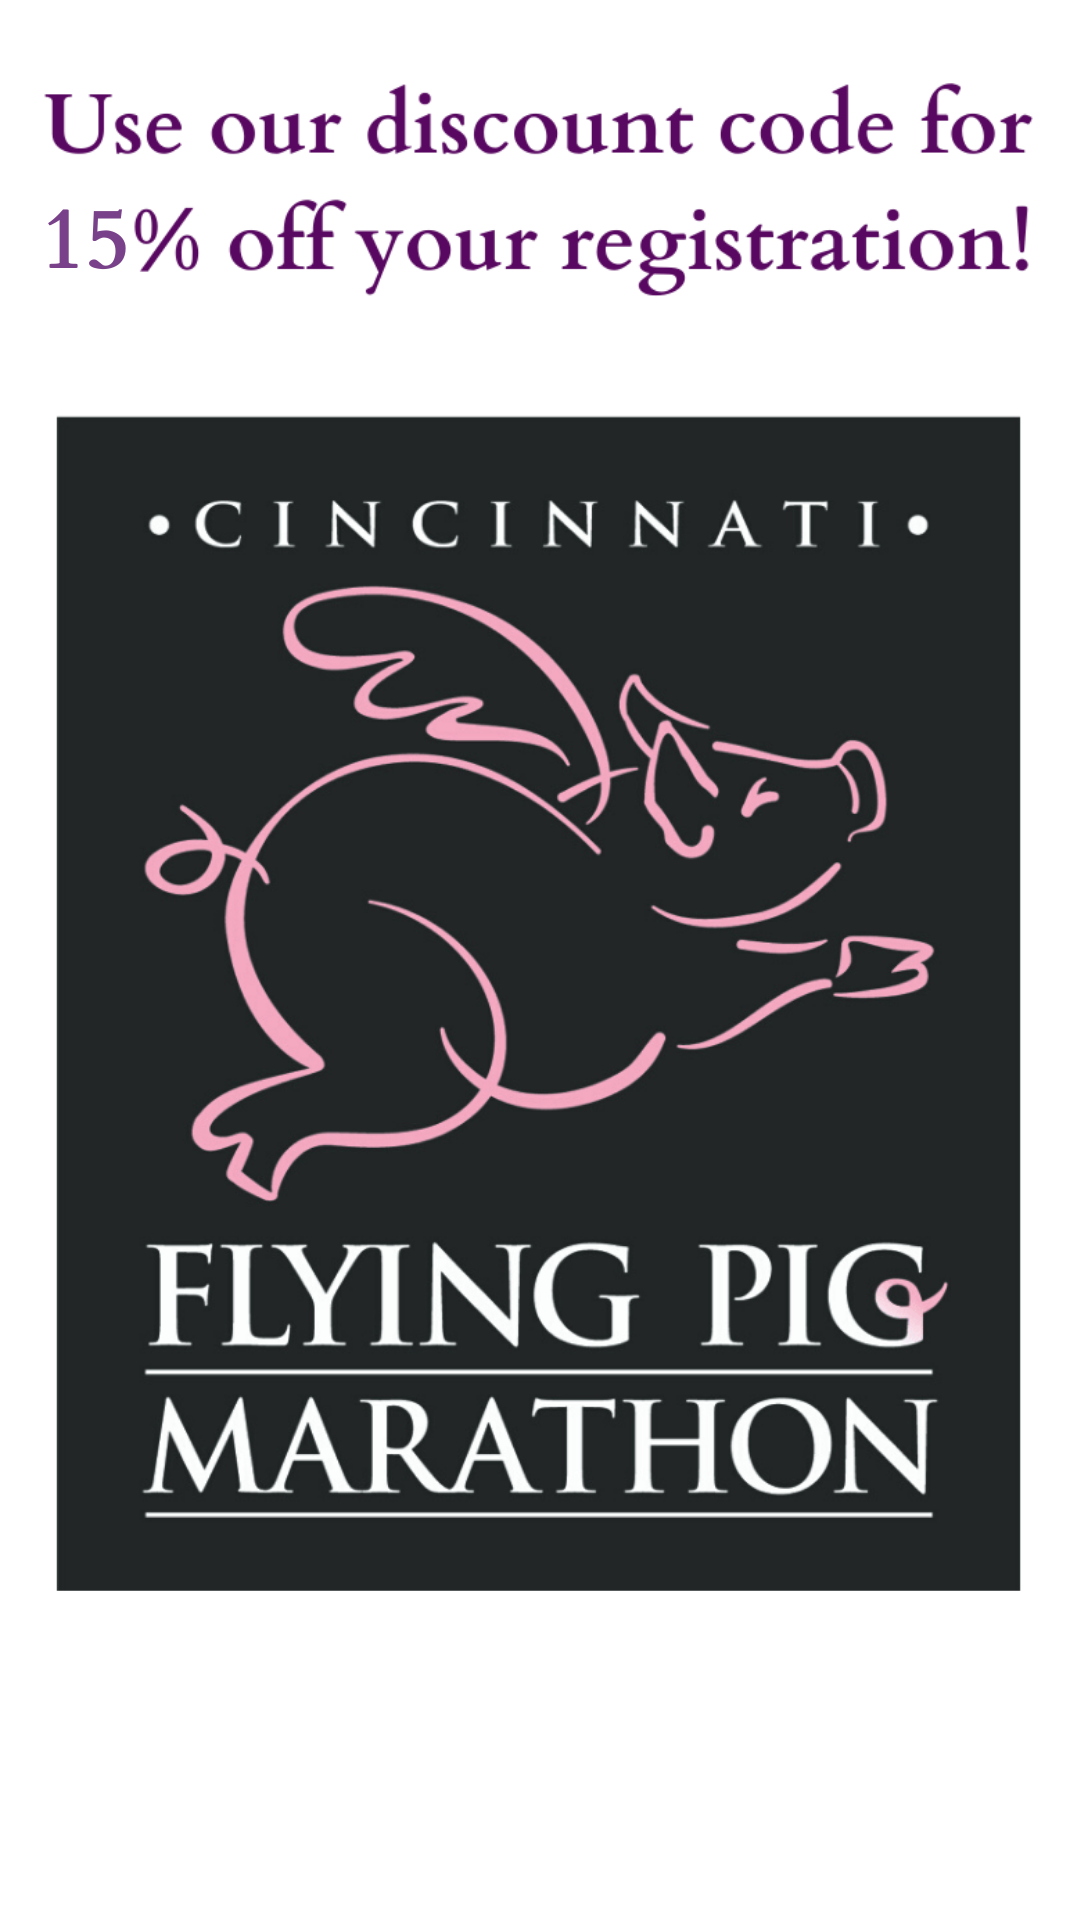 Flying Pig Discount Code - Character Council